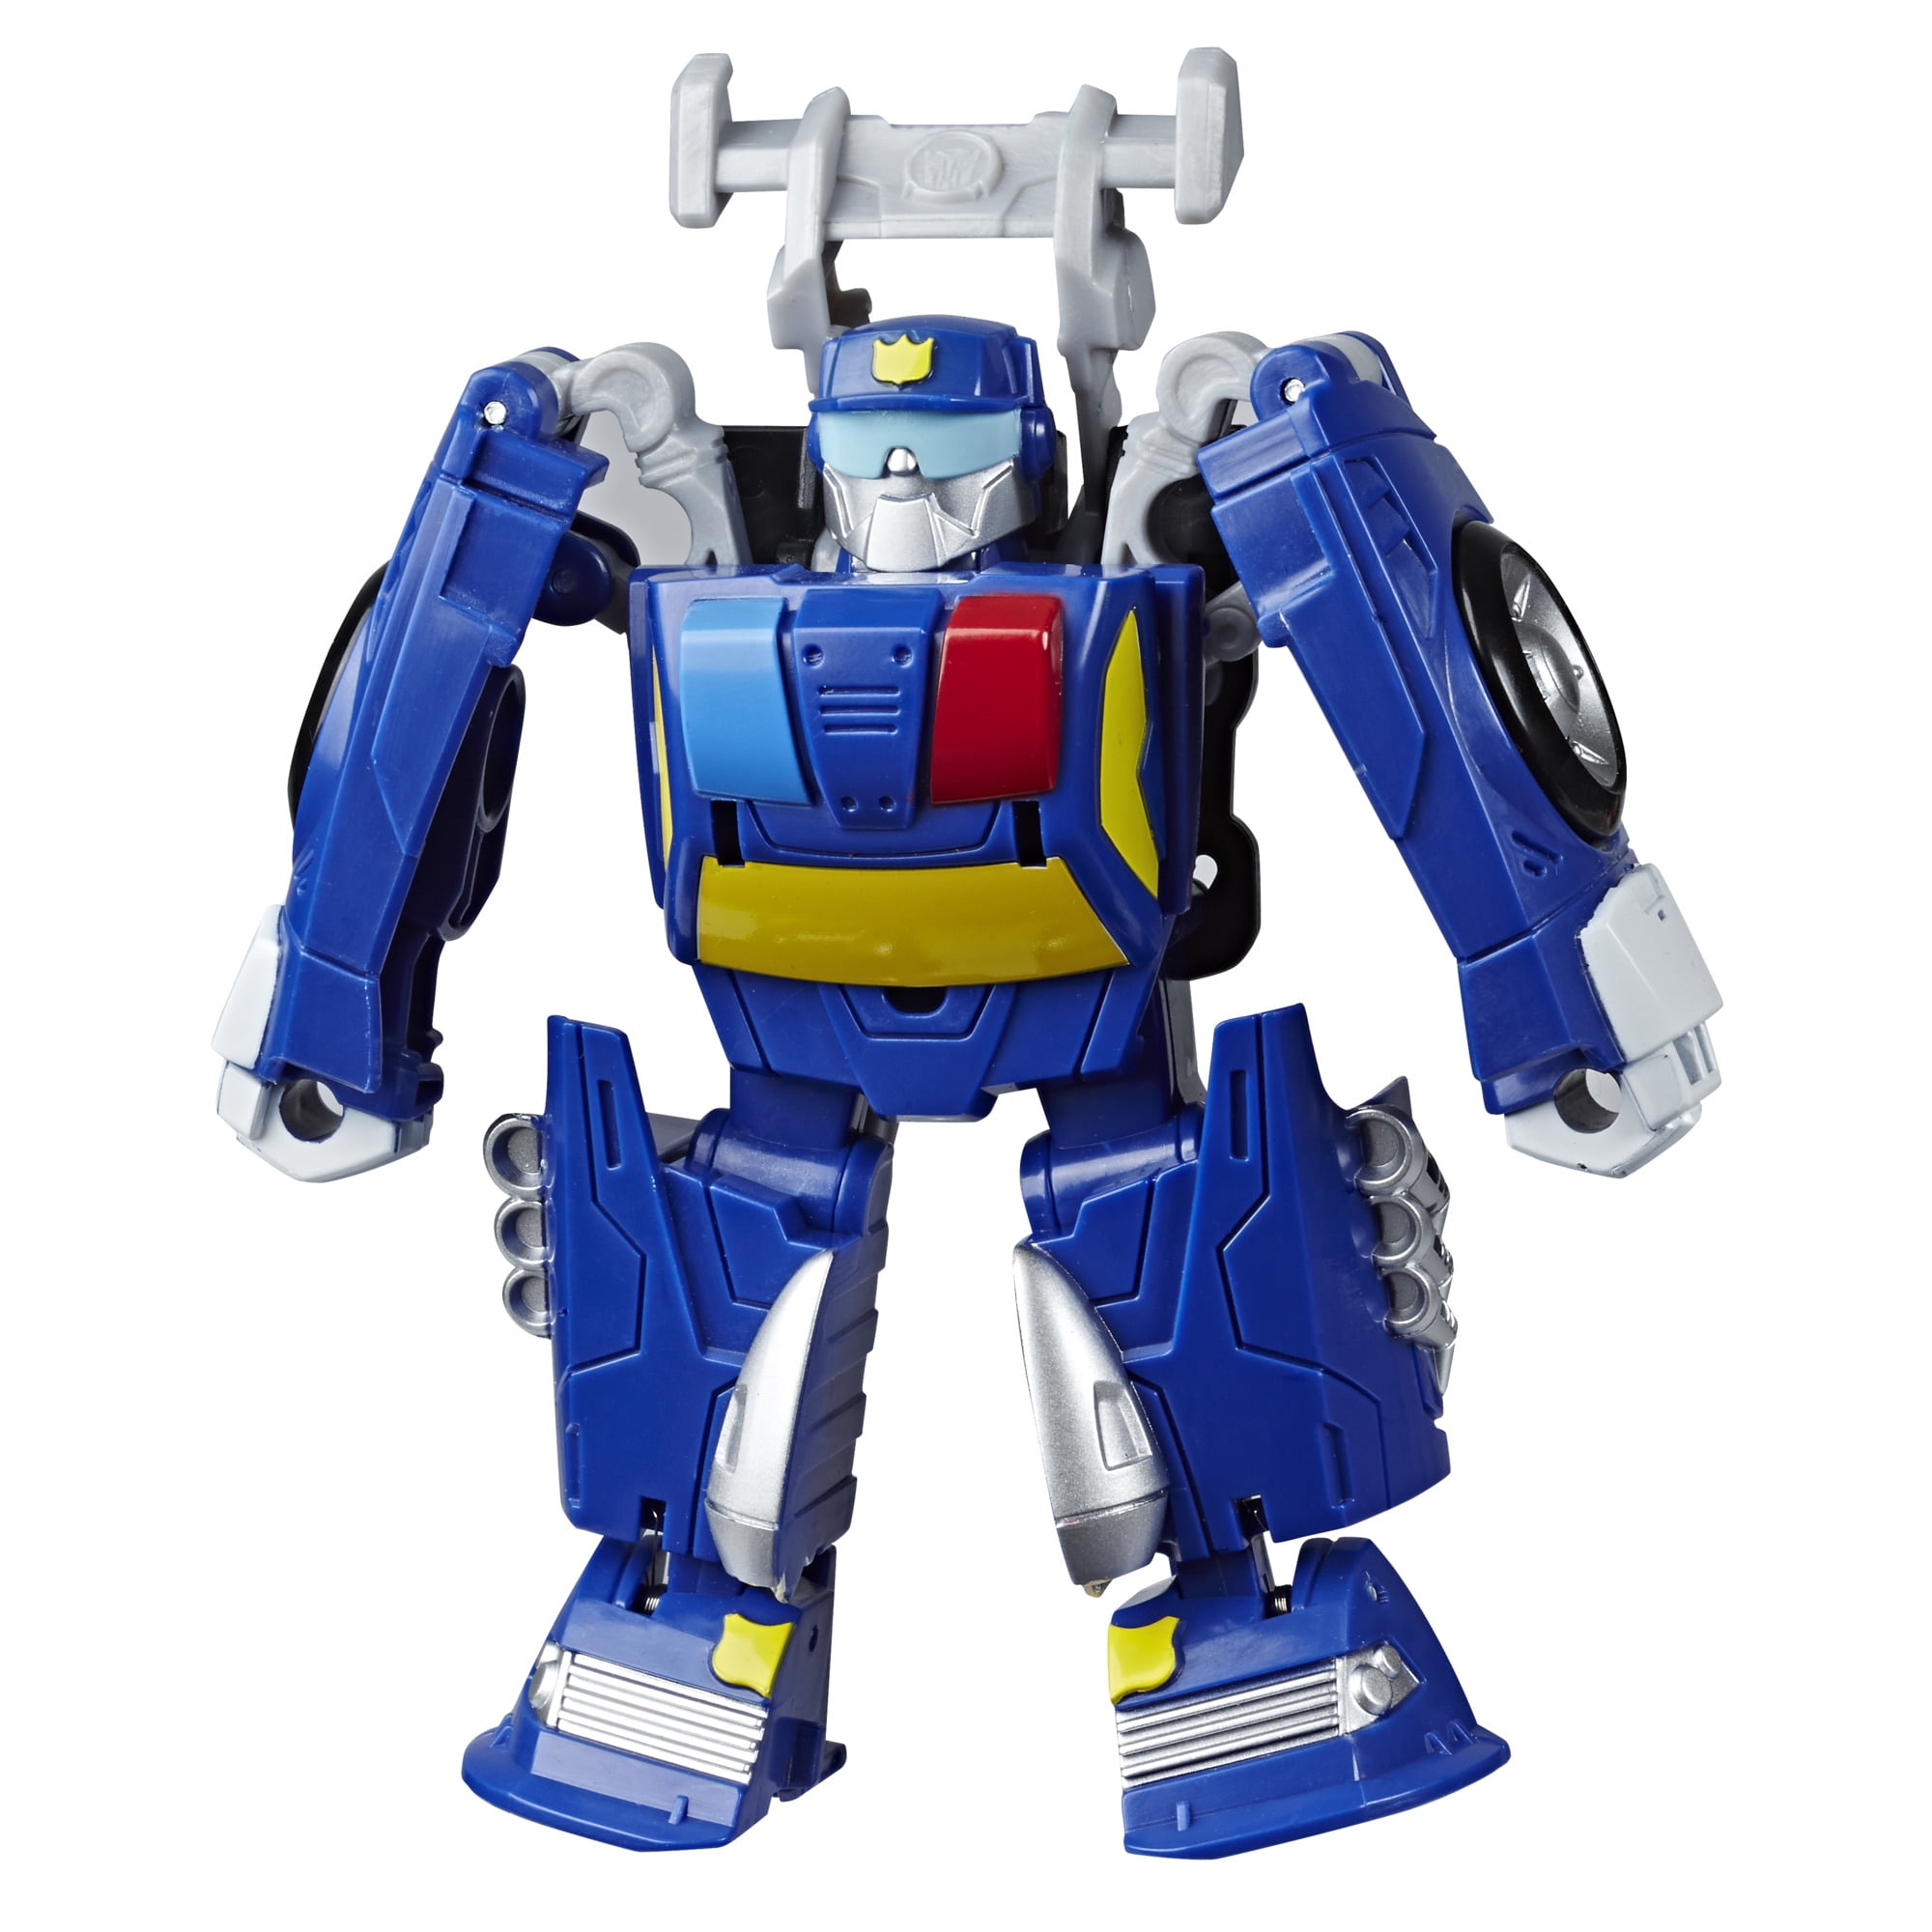 Chase moto police Bot Version-Transformers Rescue Heroes-Playskool 